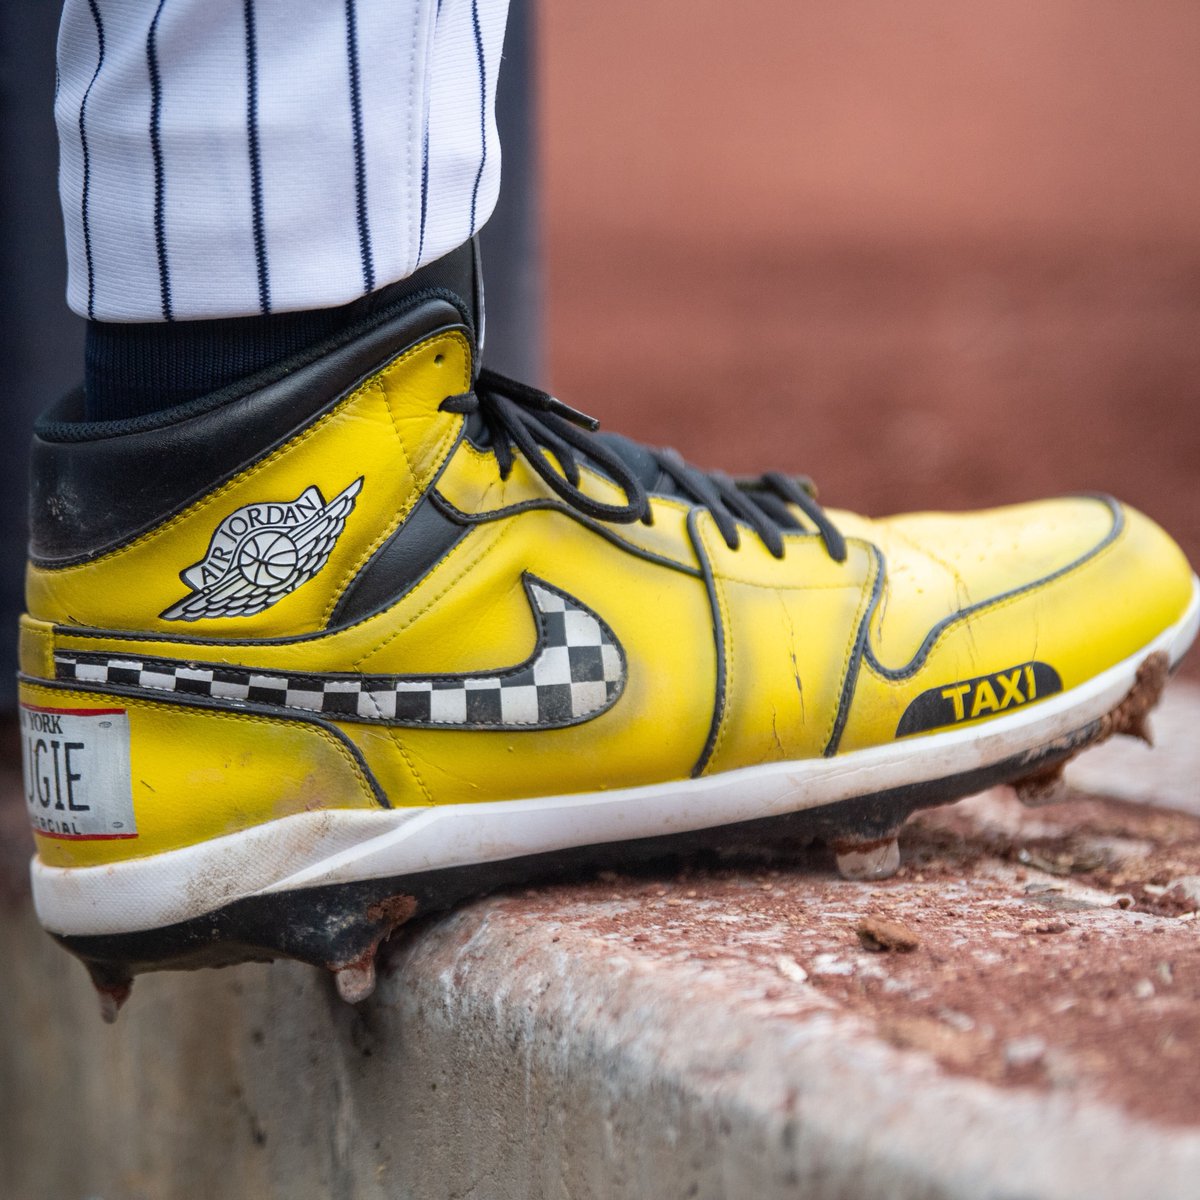 Alex Verdugo's taxi-themed Jordan cleats with a checkered swoosh go way too hard 🚕💨